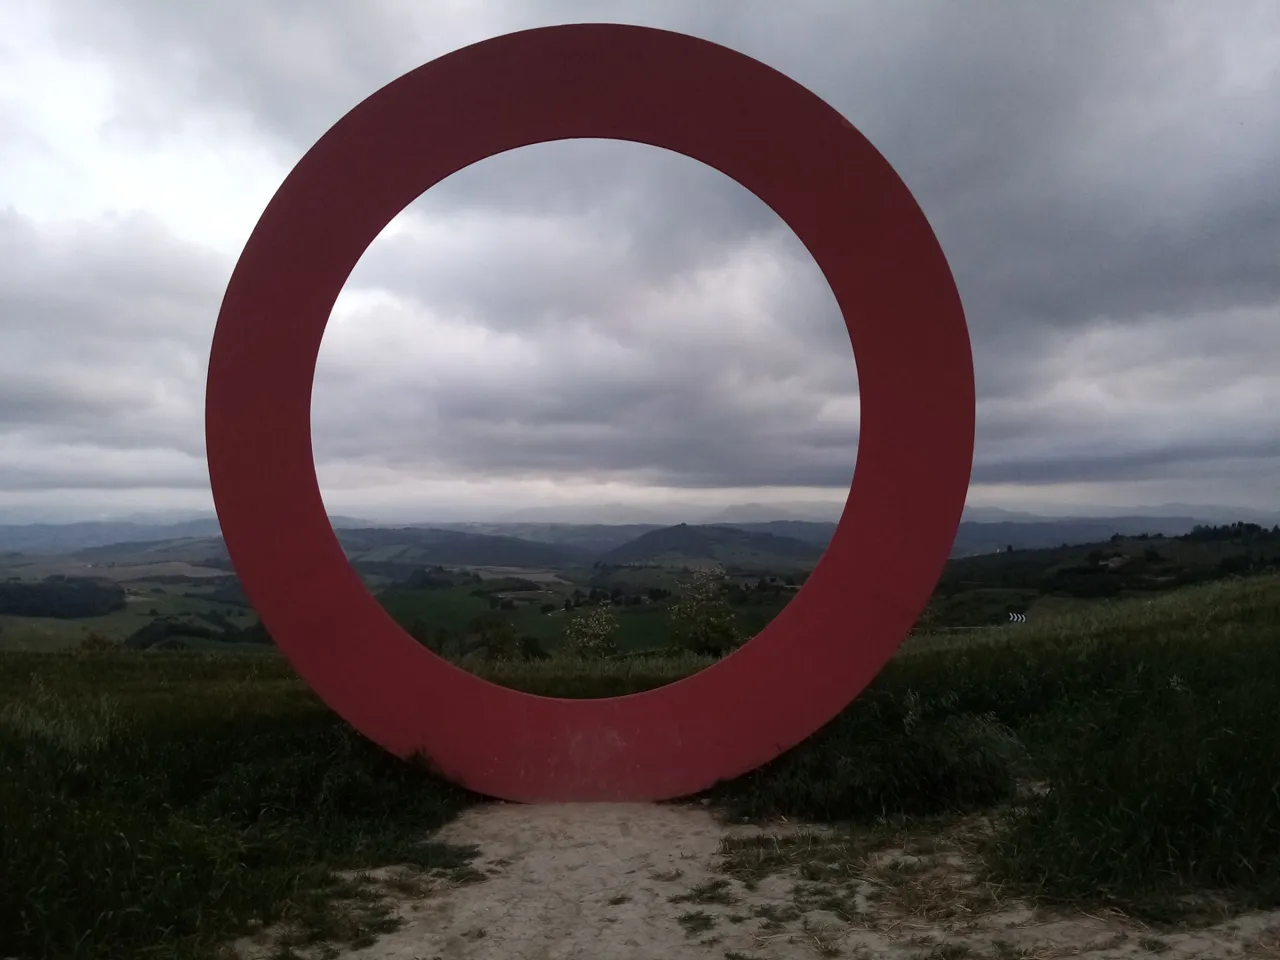 There are three of this circles. They are sculptures made by Mario Staccioli. I don’t know what to make of them but taking photo with them is fun!